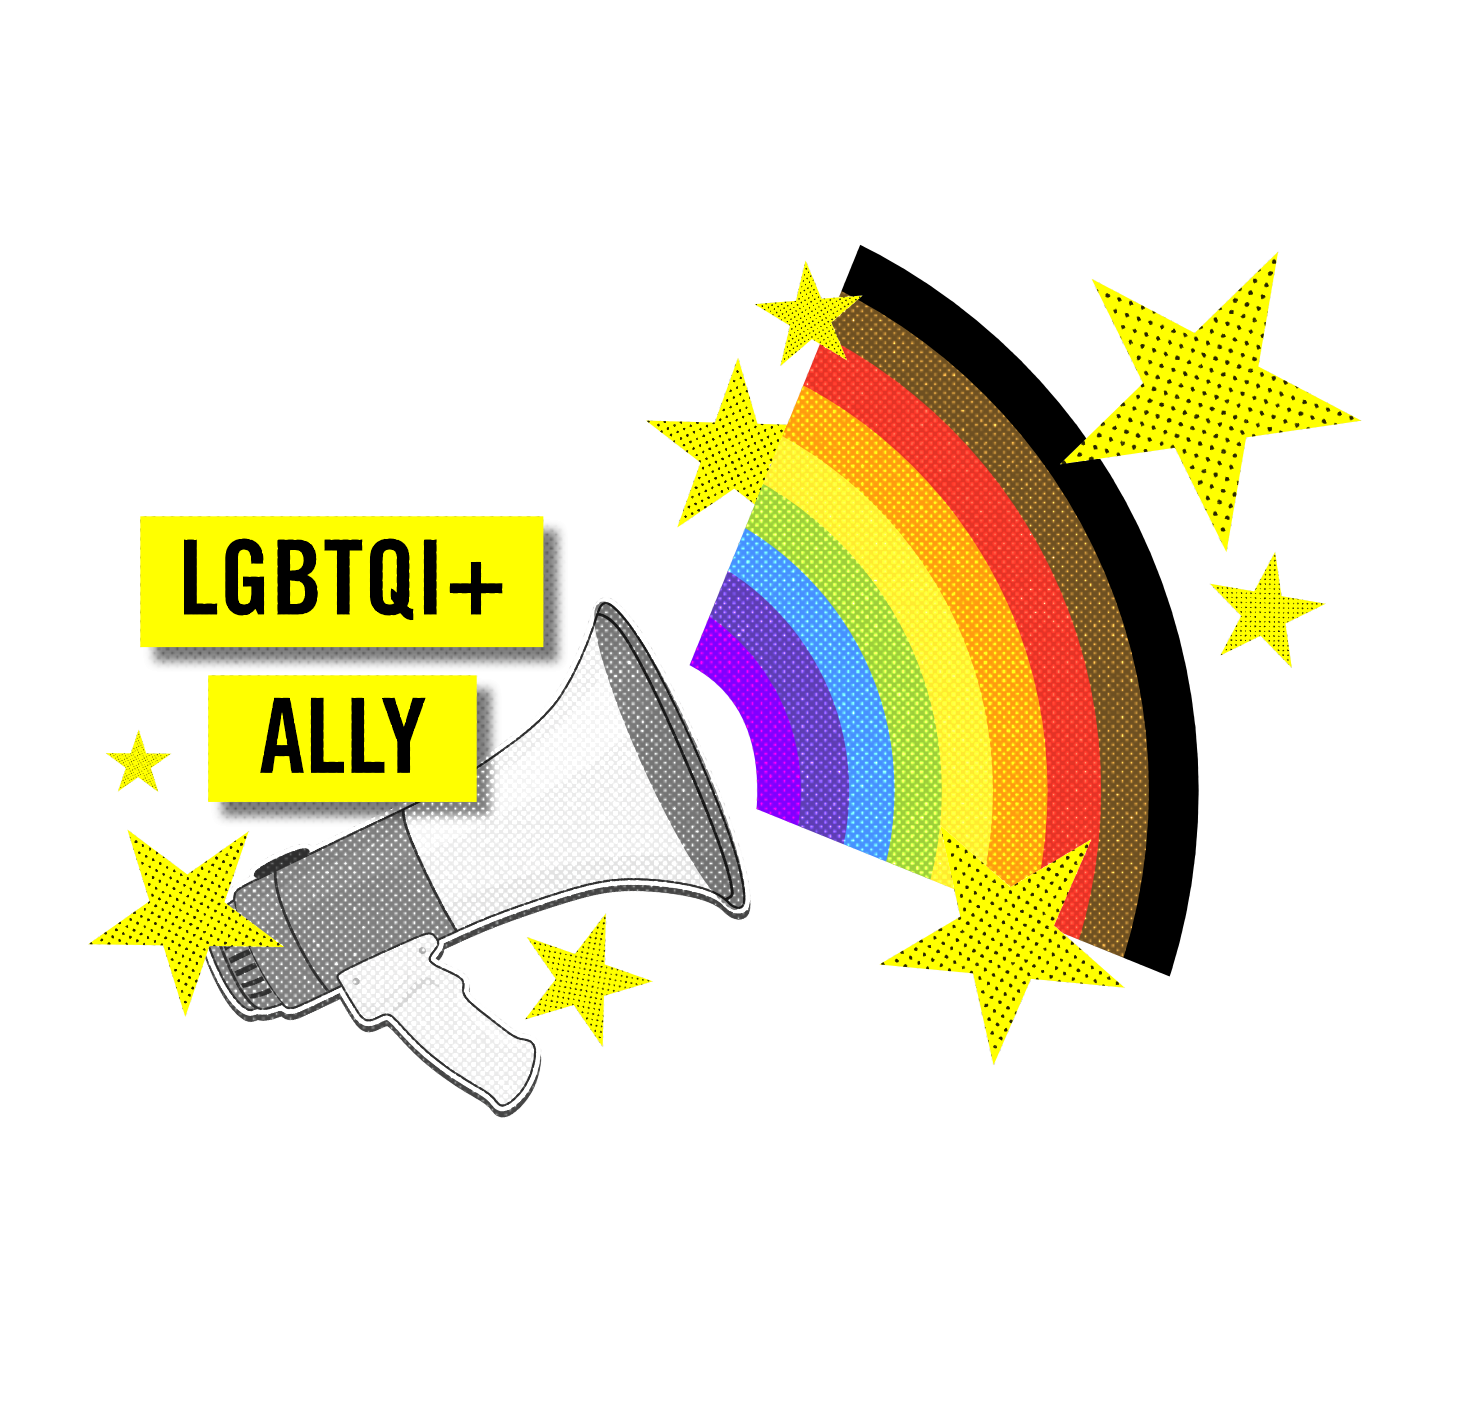 If you’re an LGBTQI+ Ally, now is your moment: the unprecedented attack on LGBTQI+ people across the United States and the world has set its crosshairs on transgender youth and children especially. We need a Transgender Bill of Rights in the U.S. and comprehensive rights protections wherever people are persecuted for who they are.